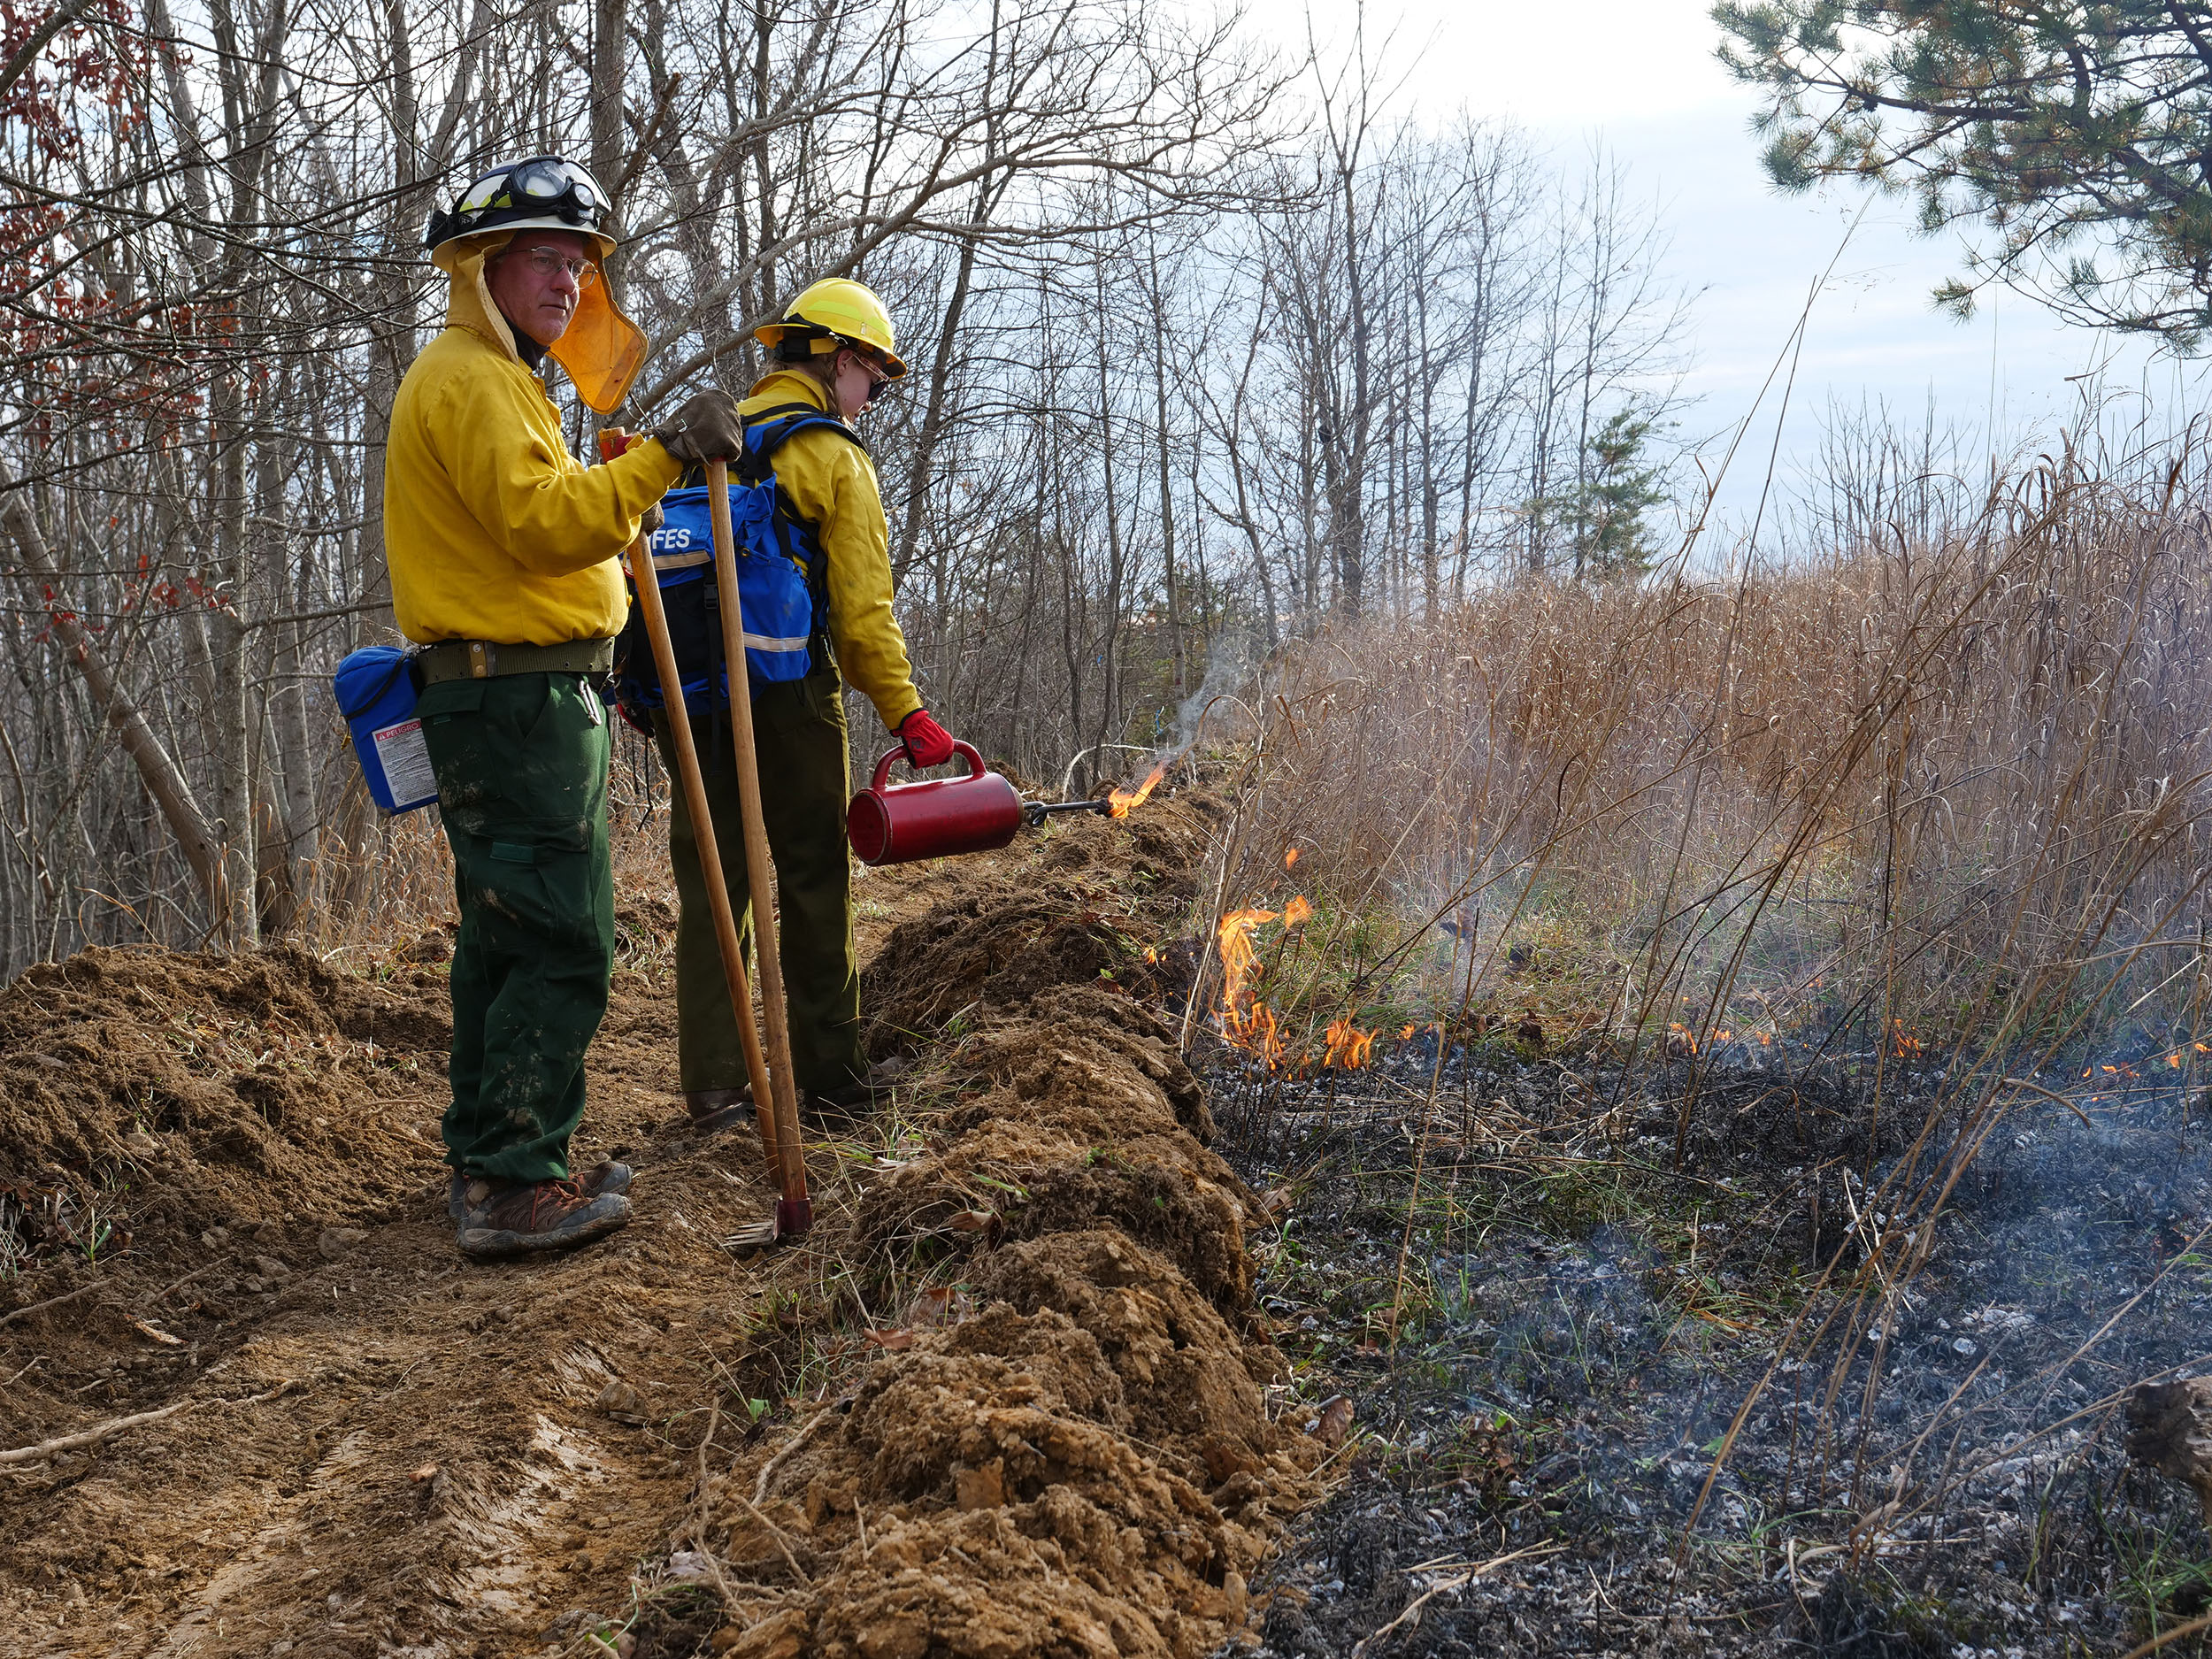 Dennis McCarthy (left) of the Virginia Department of Forestry advises student Emily Newcombe on techniques for igniting along the fire perimeter